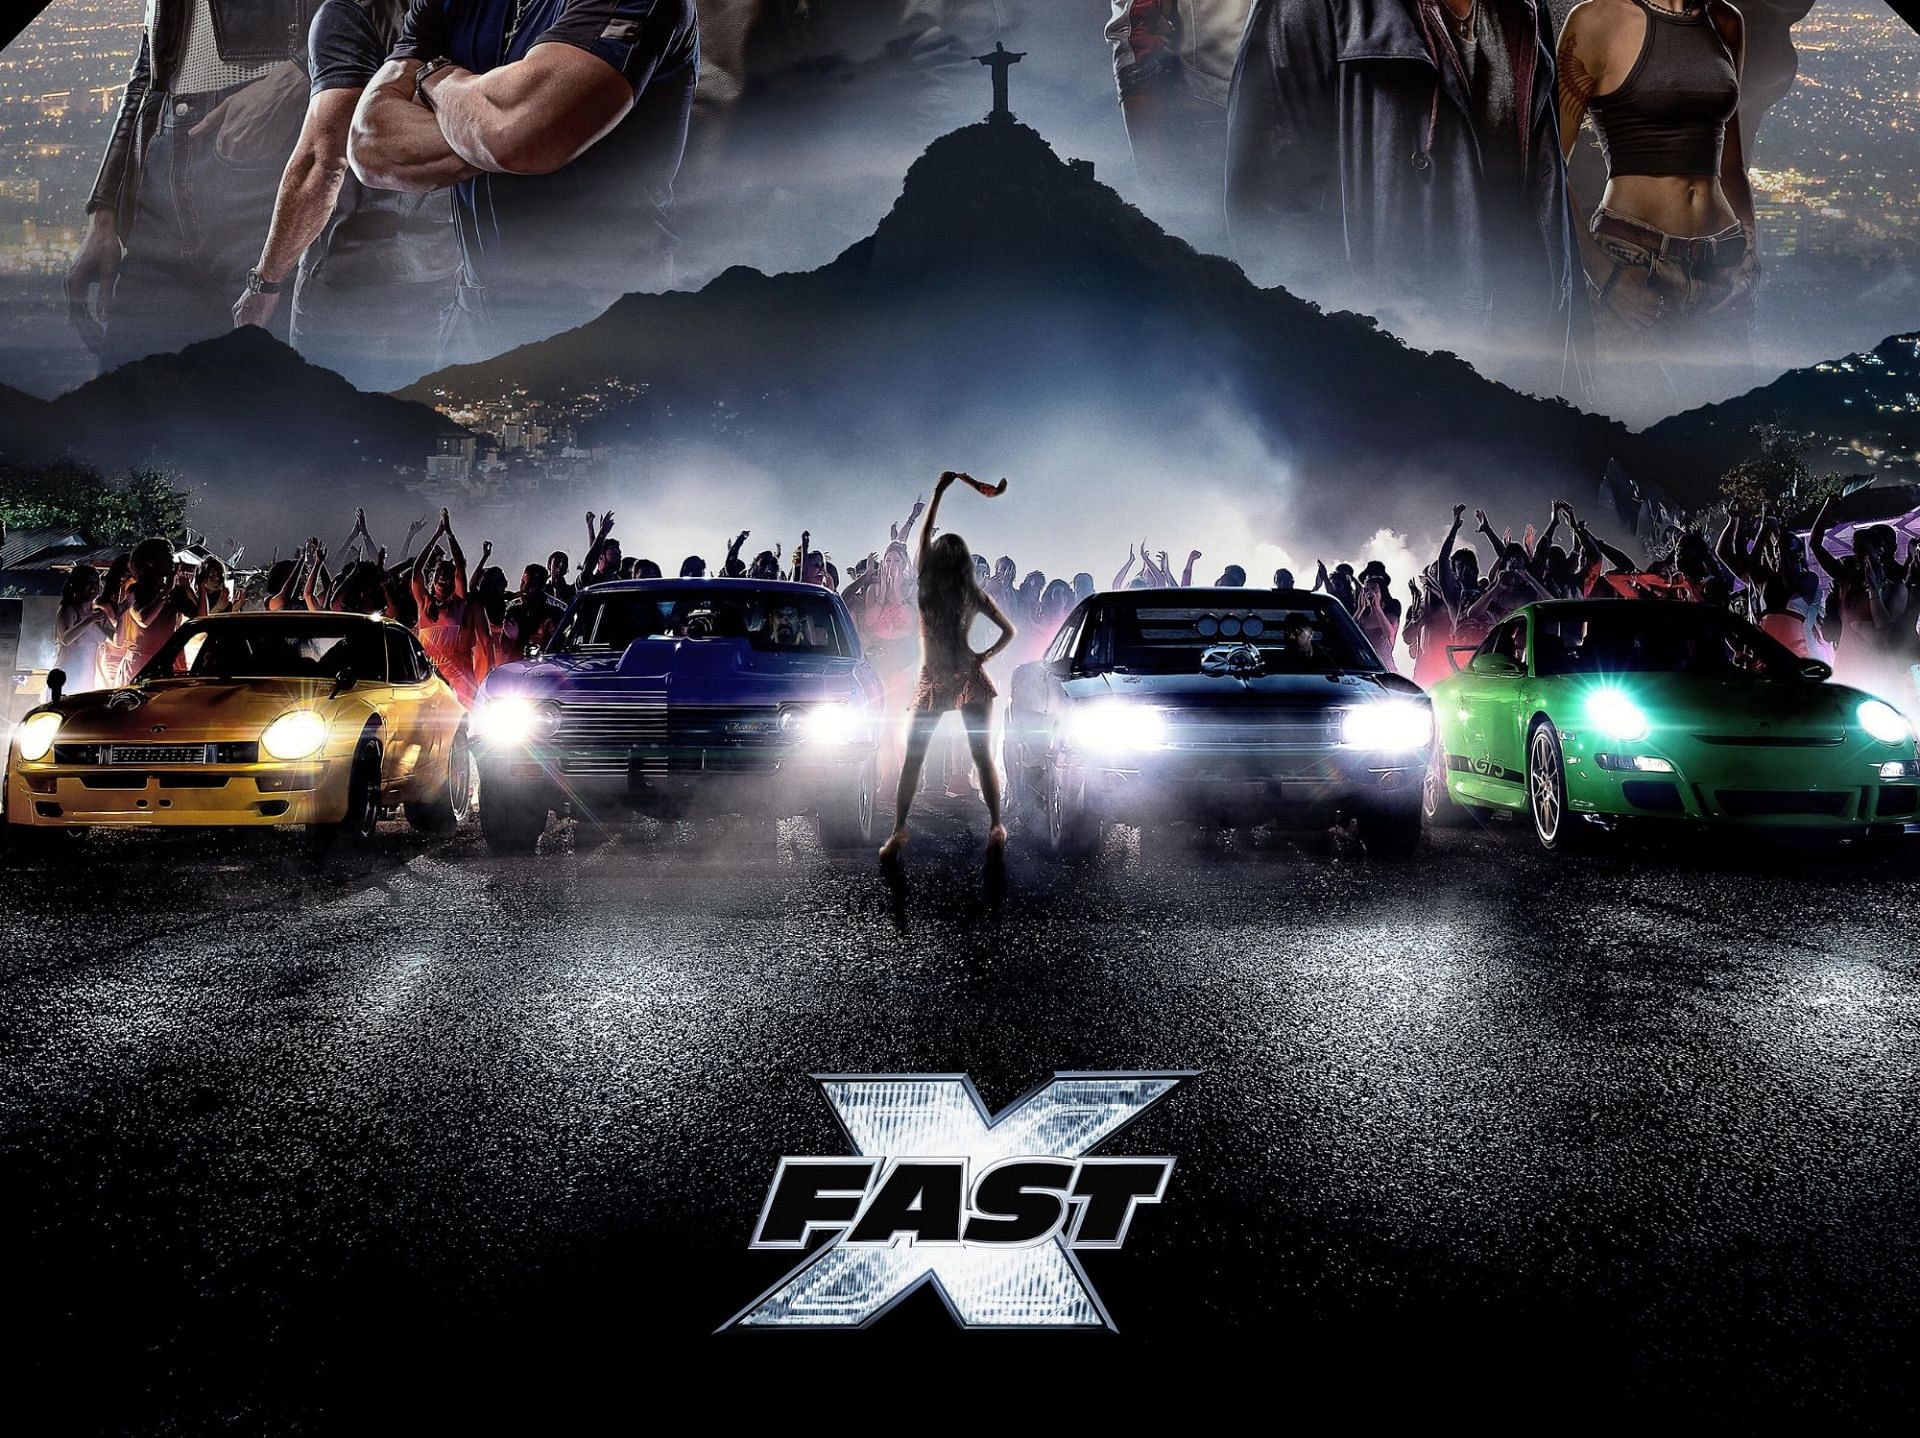 4 fast-paced car movies to watch ahead of Fast X release